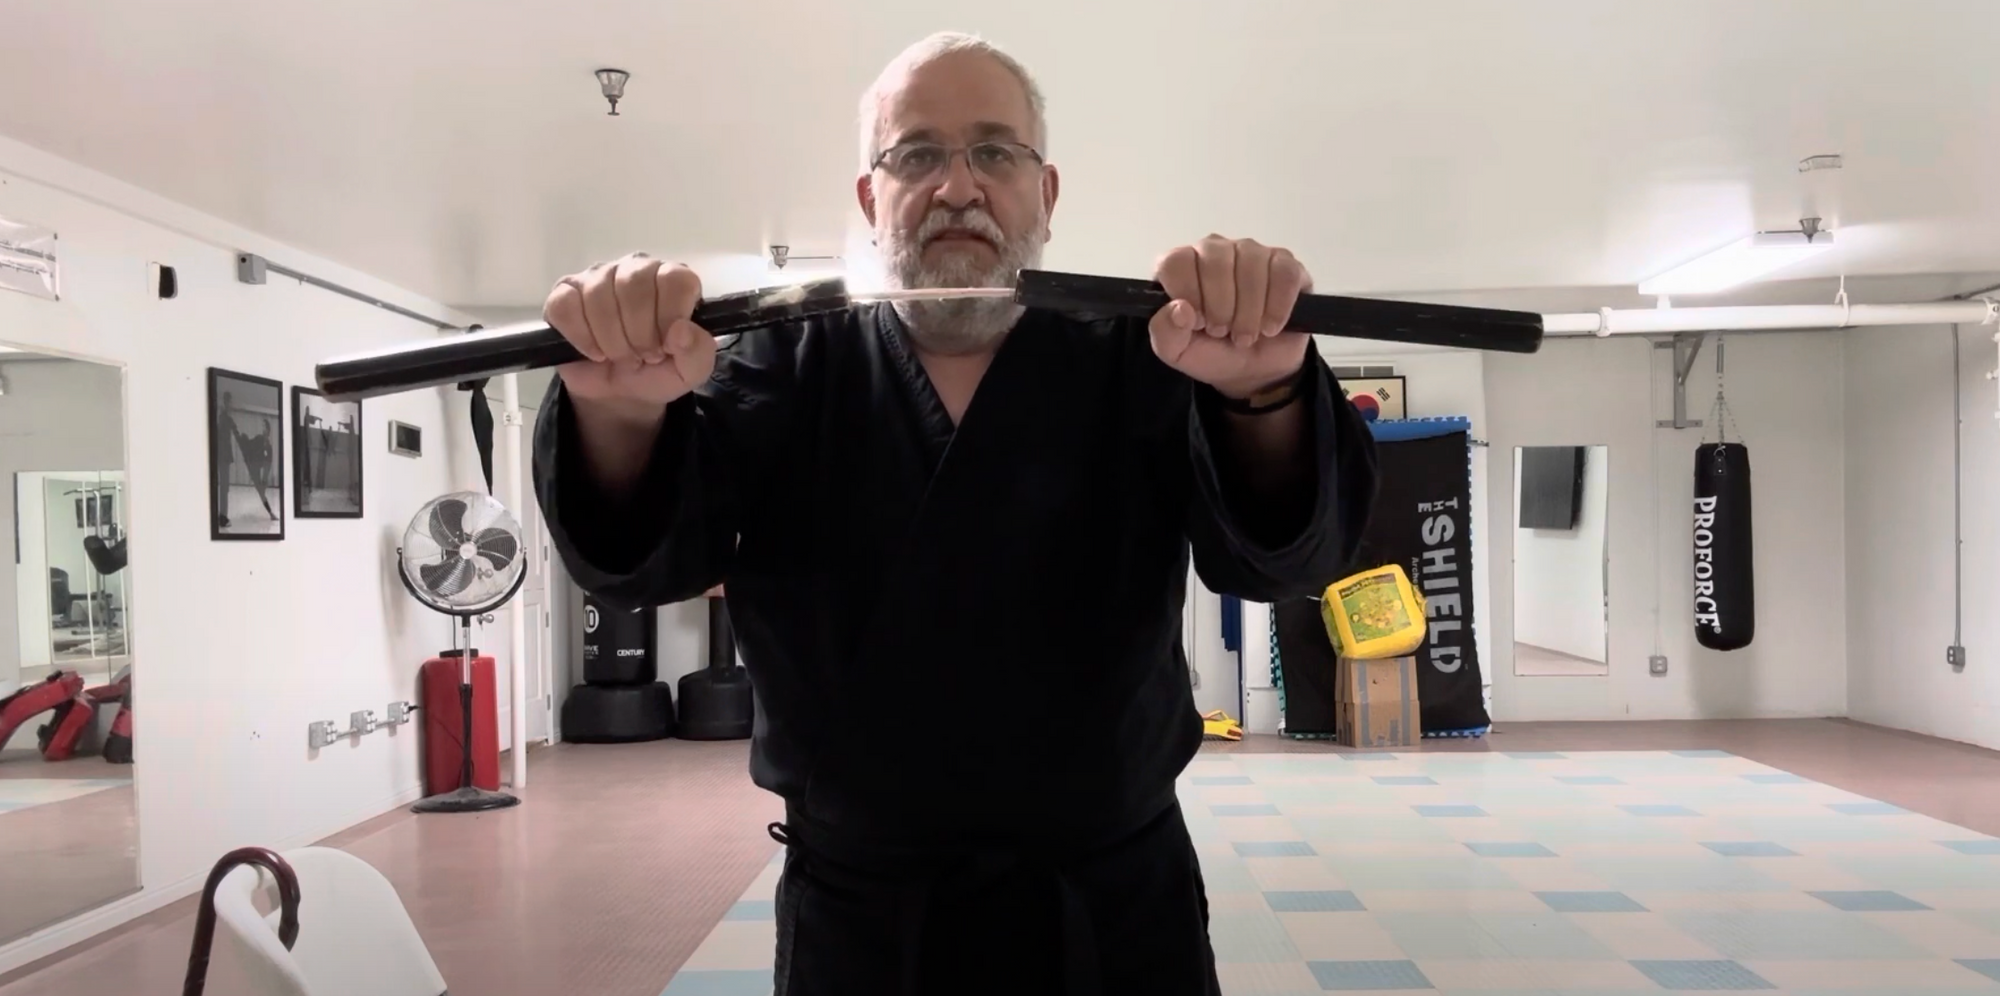 Why Do You Want To Learn Nunchuks?